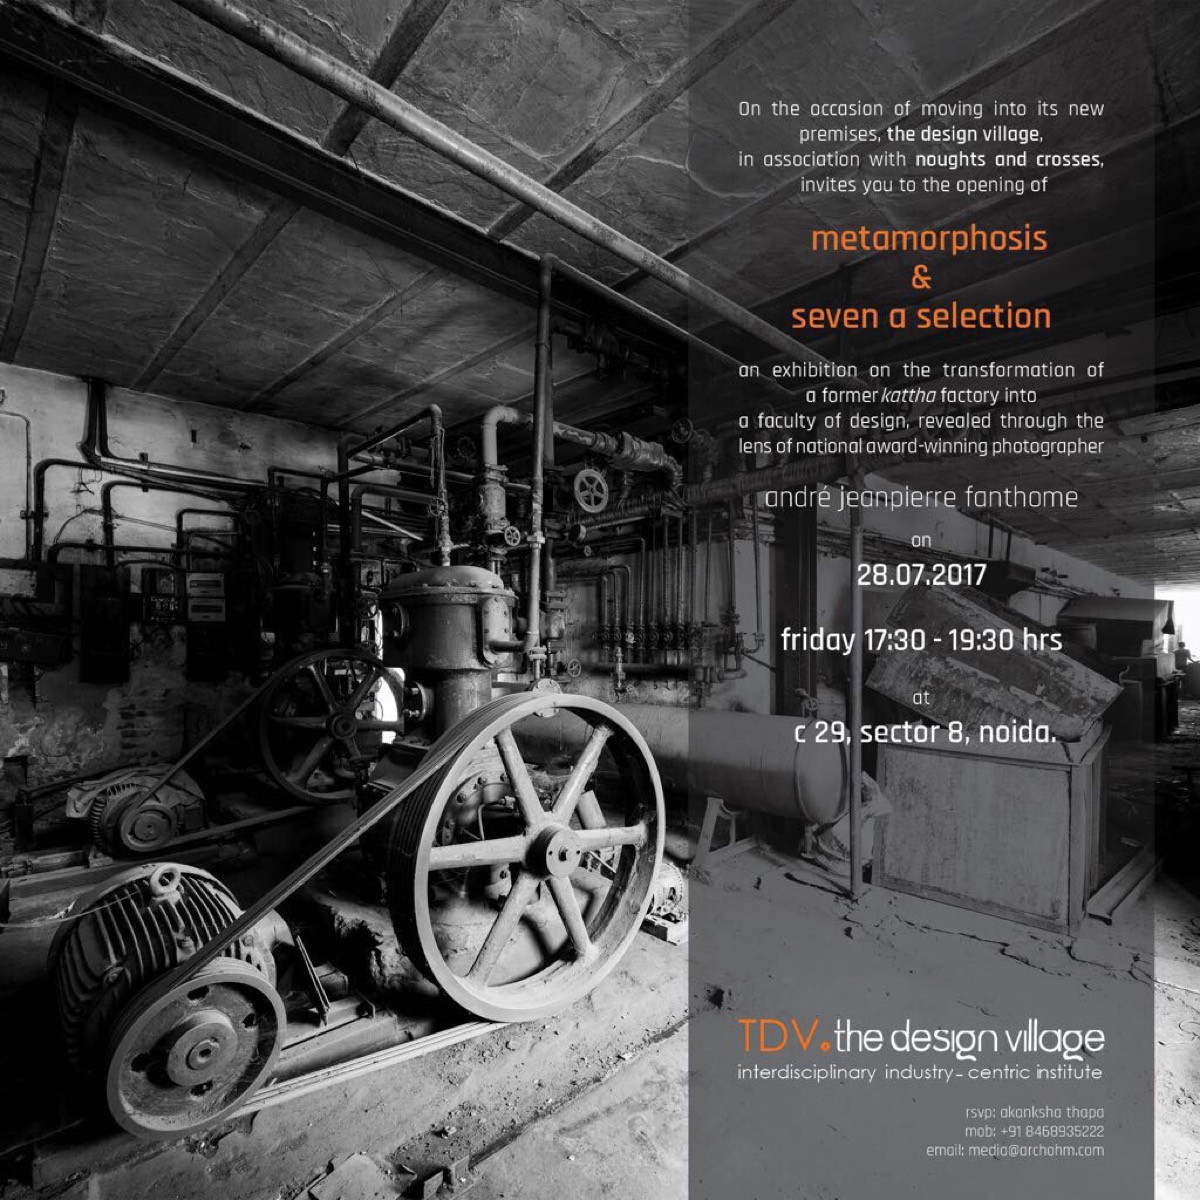 Photography exhibition by fanthome